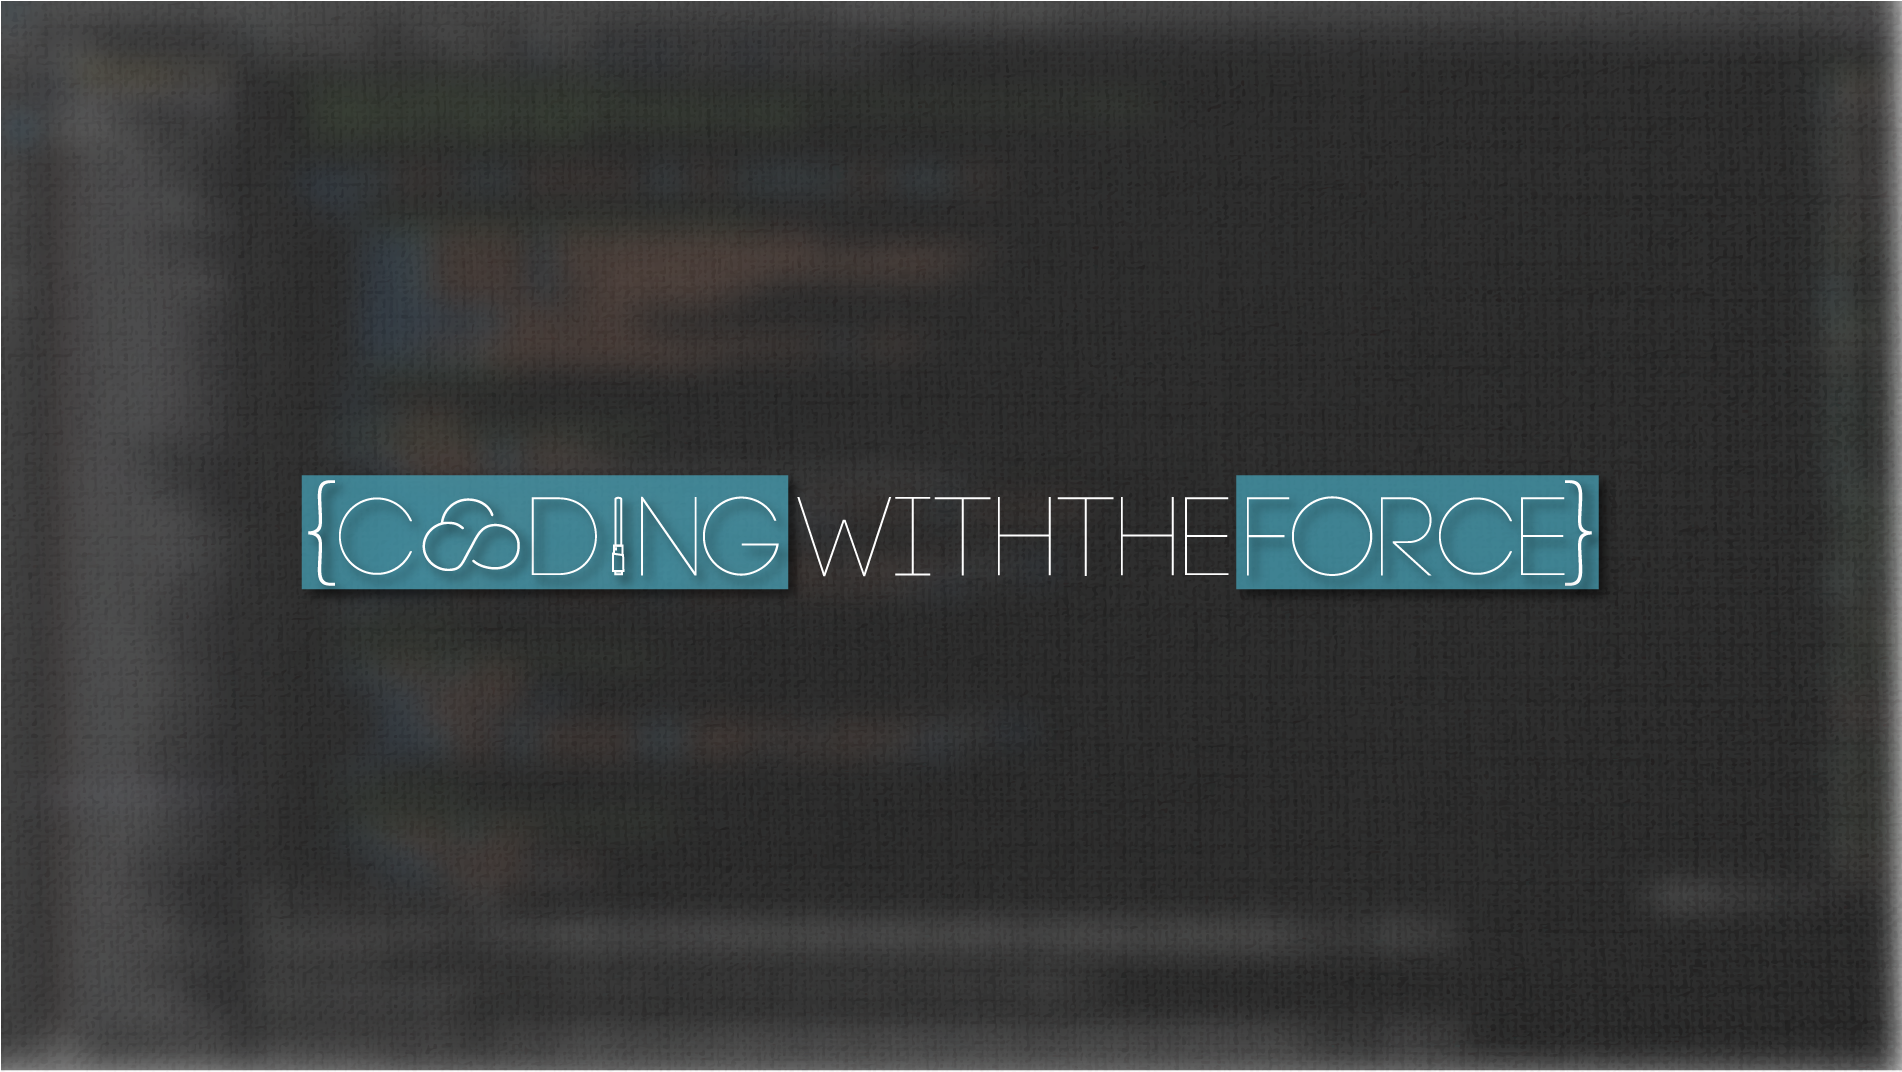 Coding With The Force